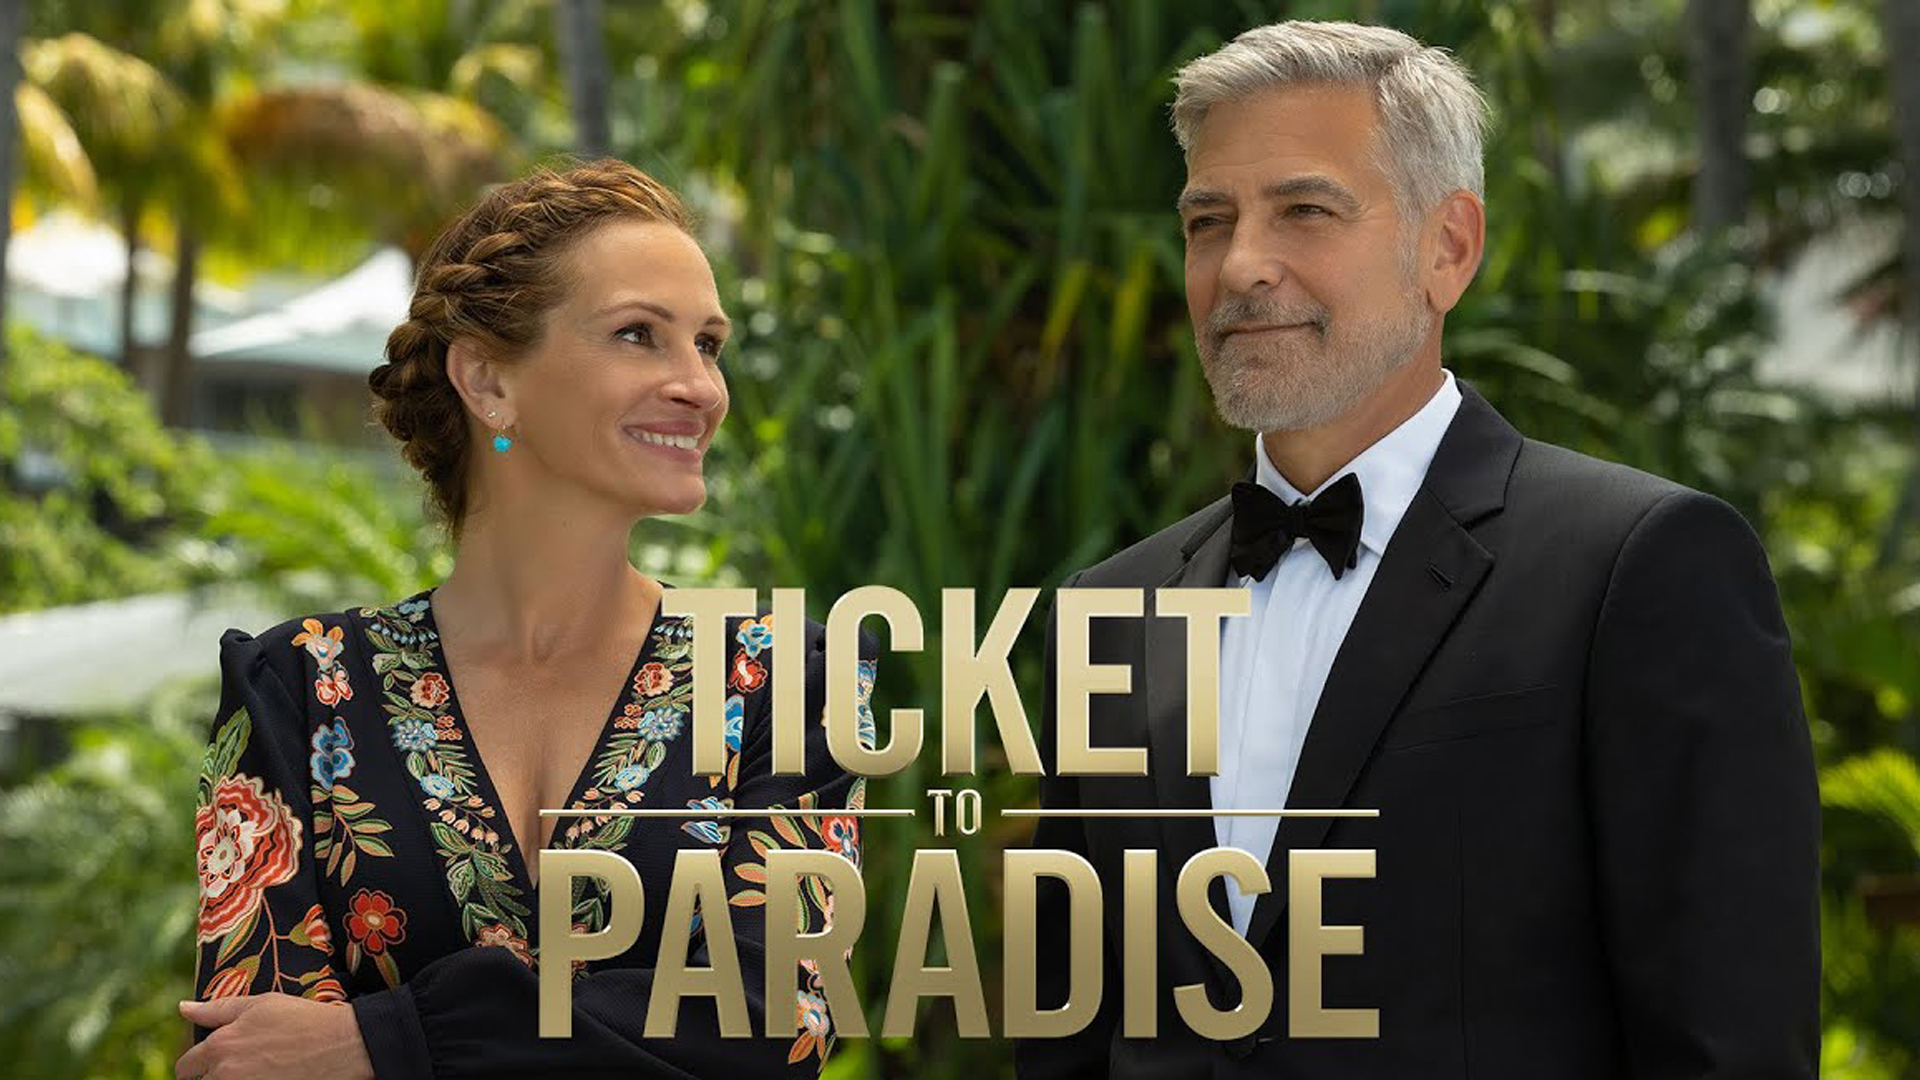 Silver Screening: Ticket to Paradise